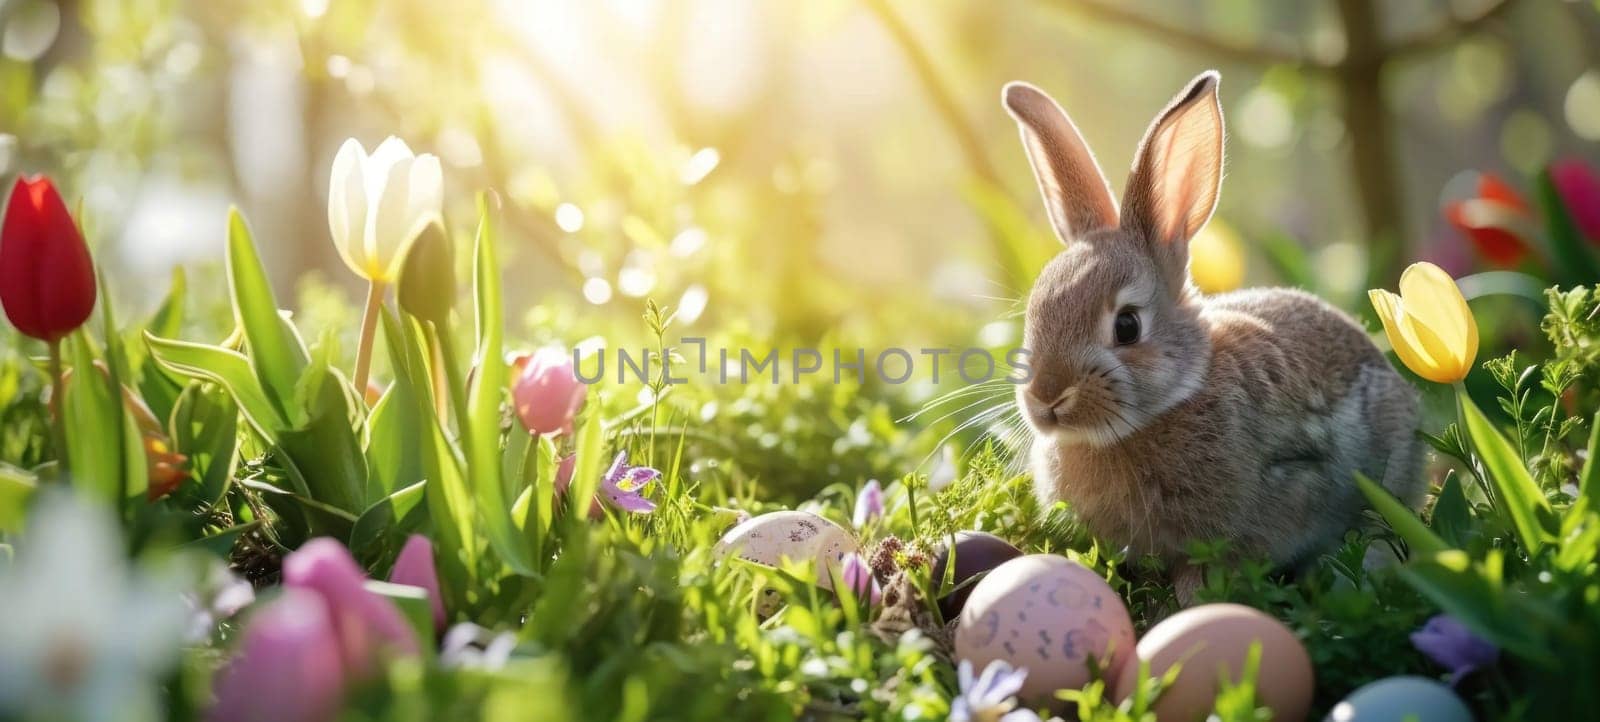 A delightful Easter bunny sits among a colorful field of tulips with scattered Easter eggs, highlighted by the radiant morning sun.